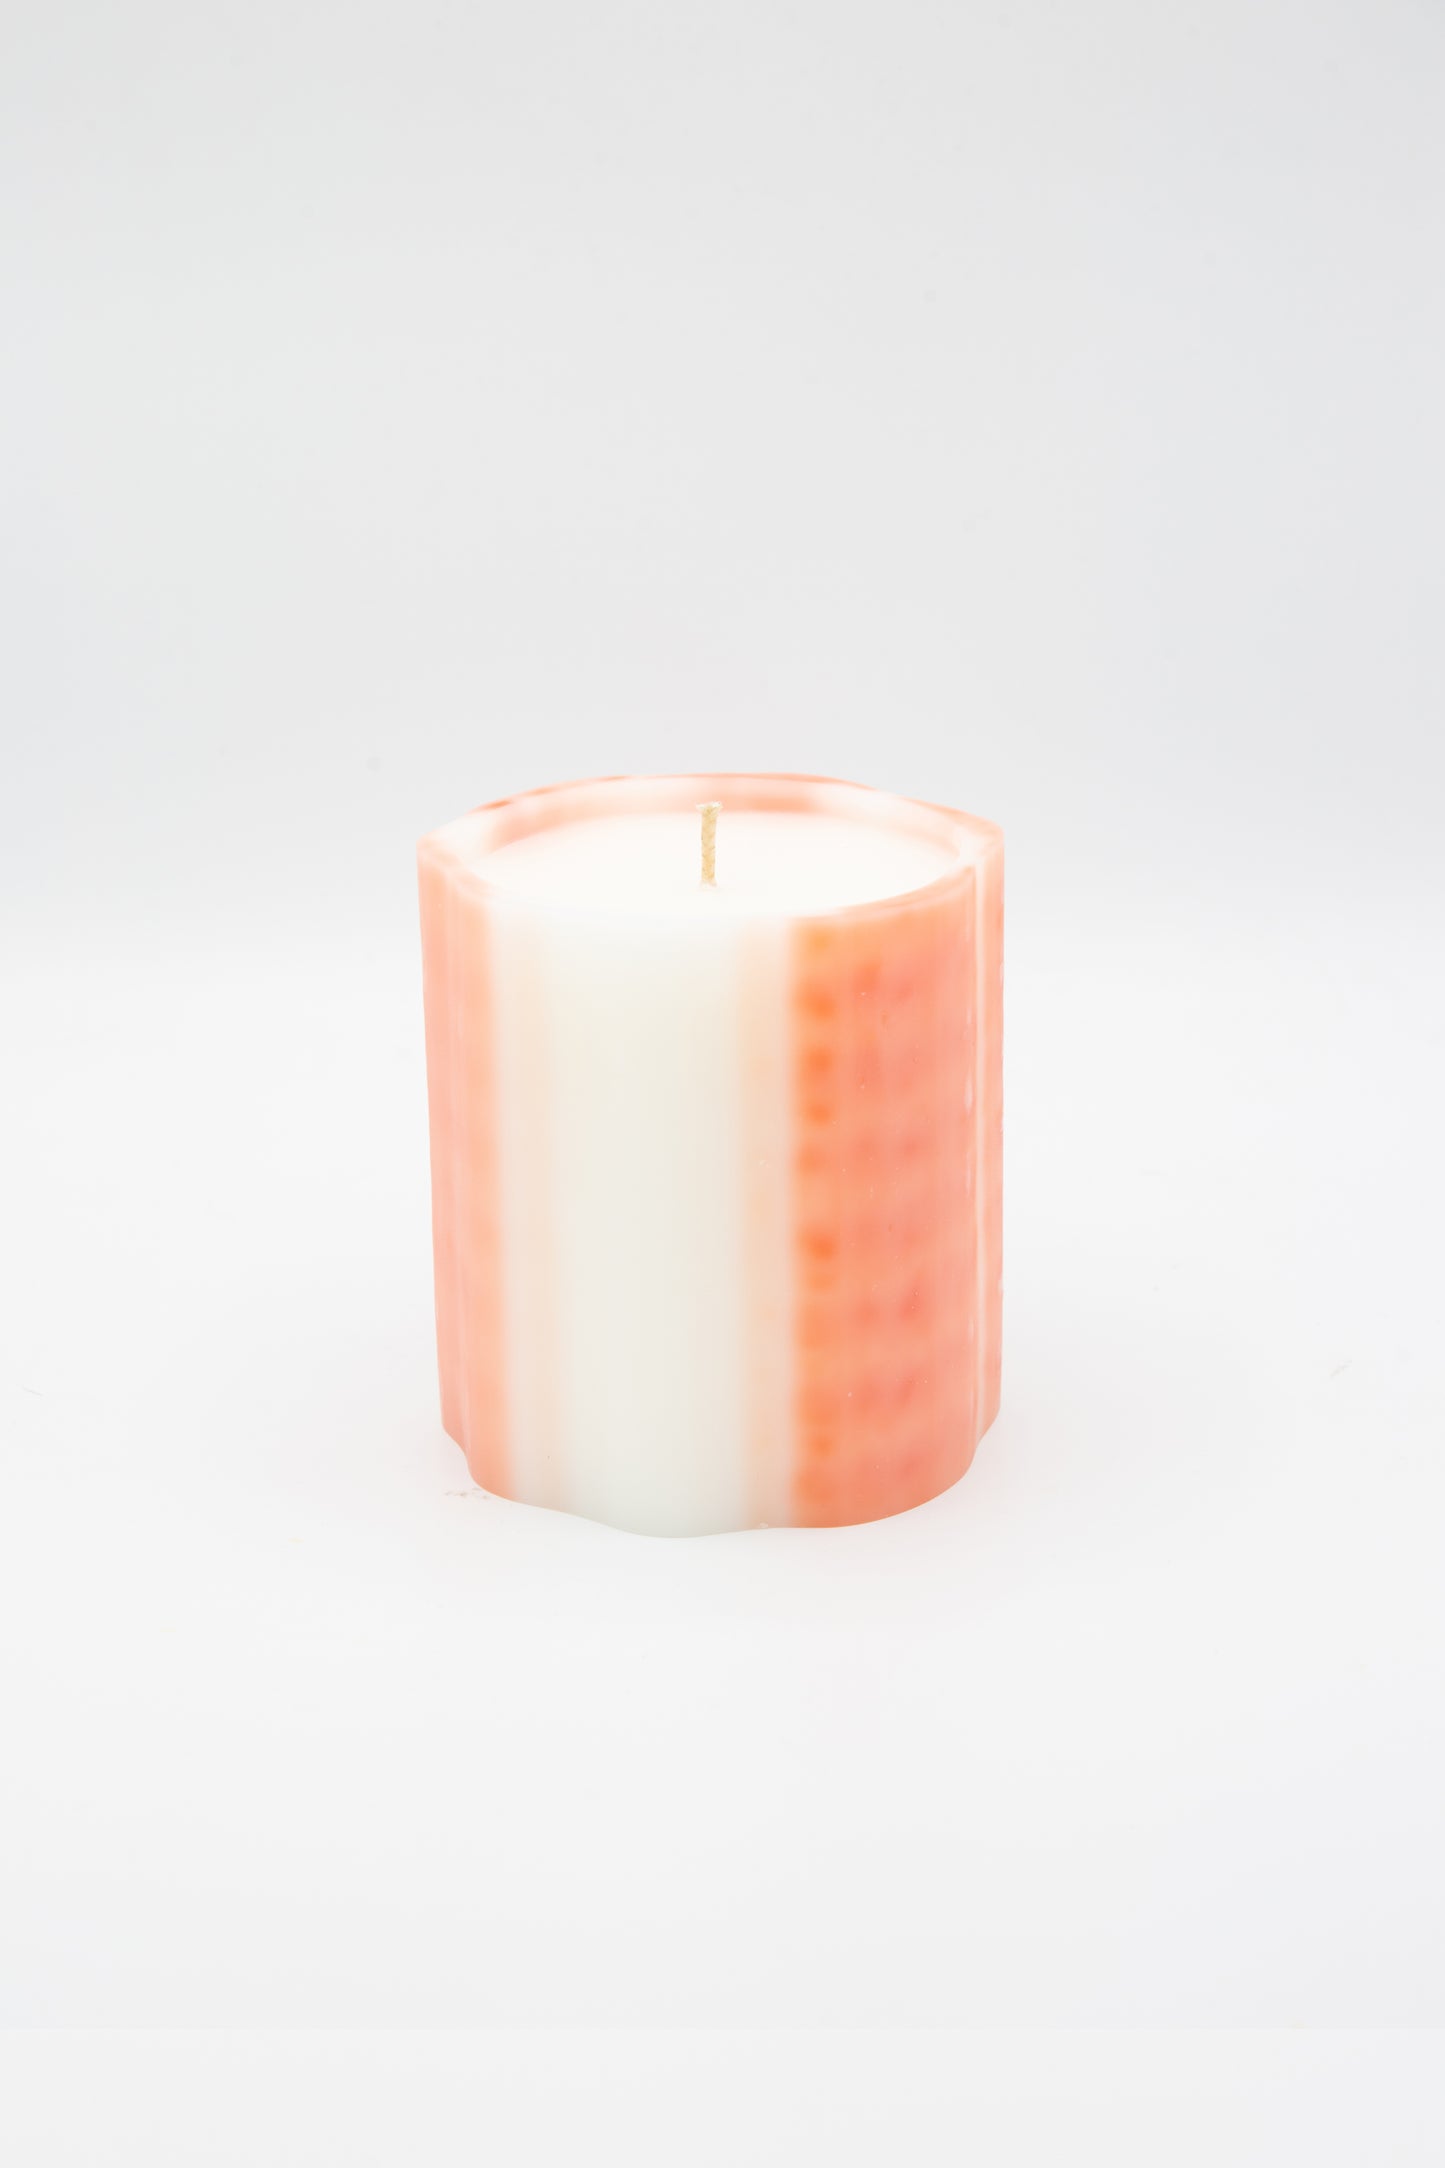 An Artisanal Candle in Neroli by Le Feu De L'Eau with orange and white stripes on a white background.